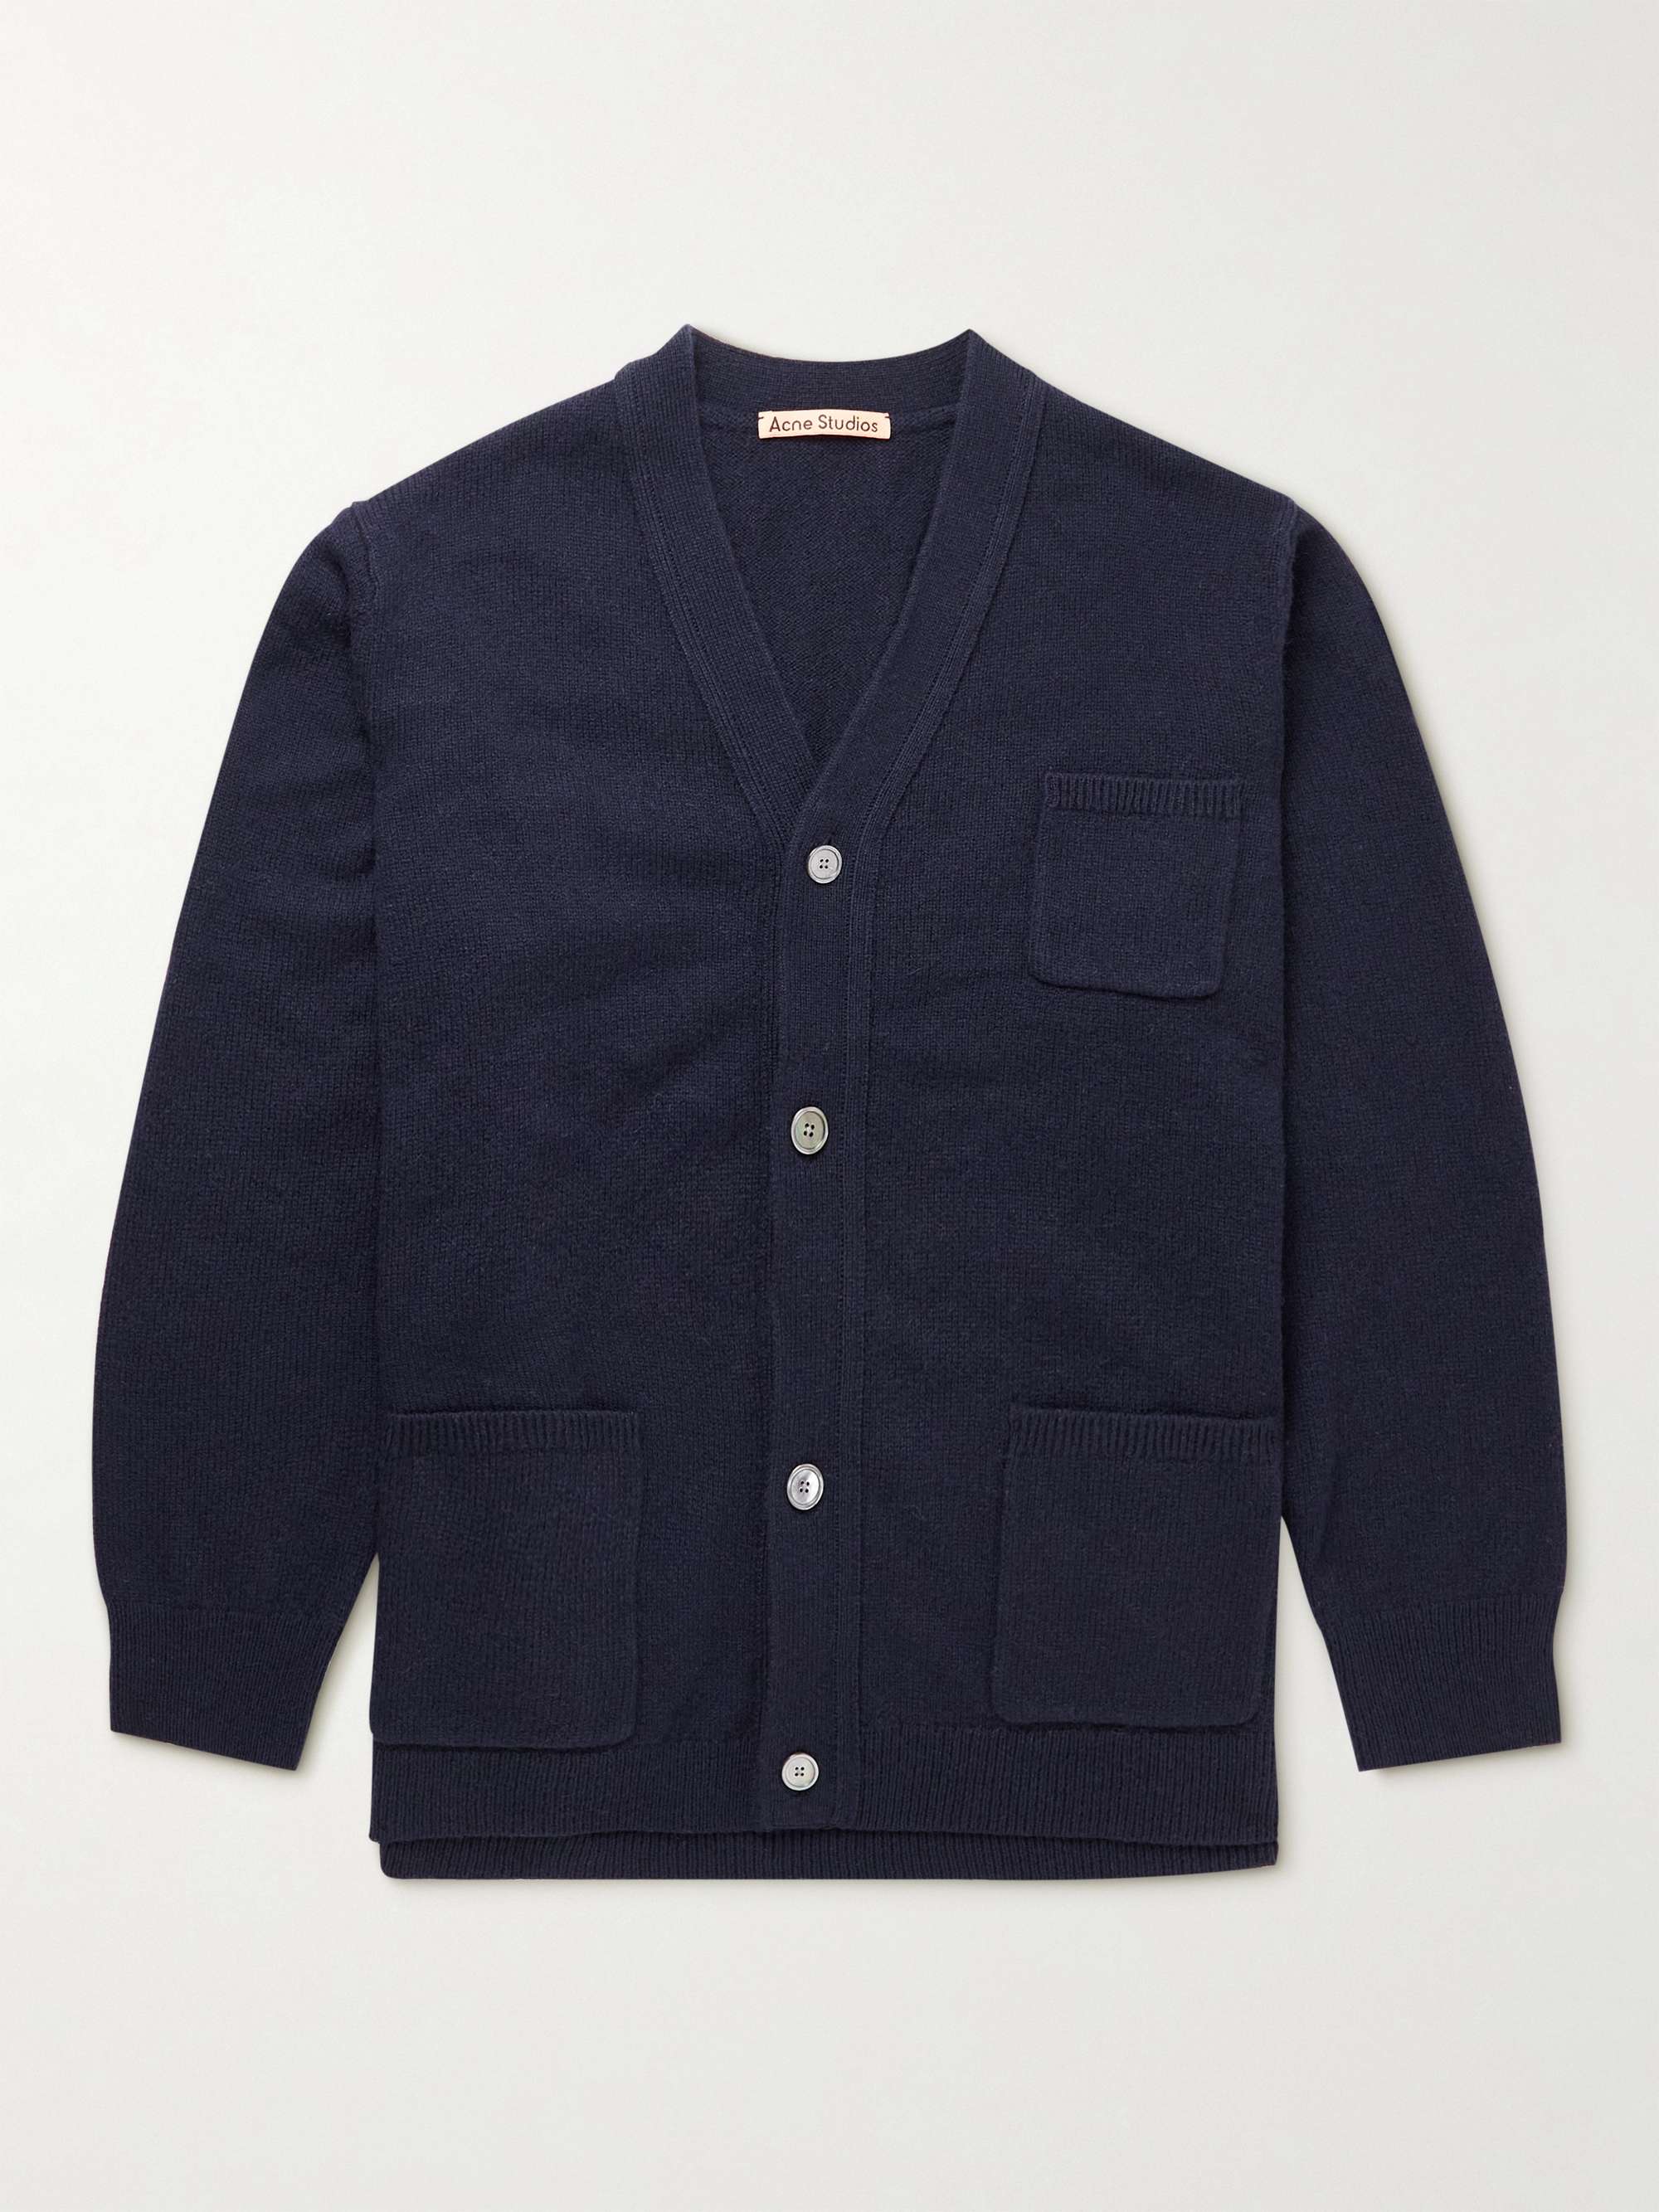 ACNE STUDIOS Wool and Cashmere-Blend Cardigan